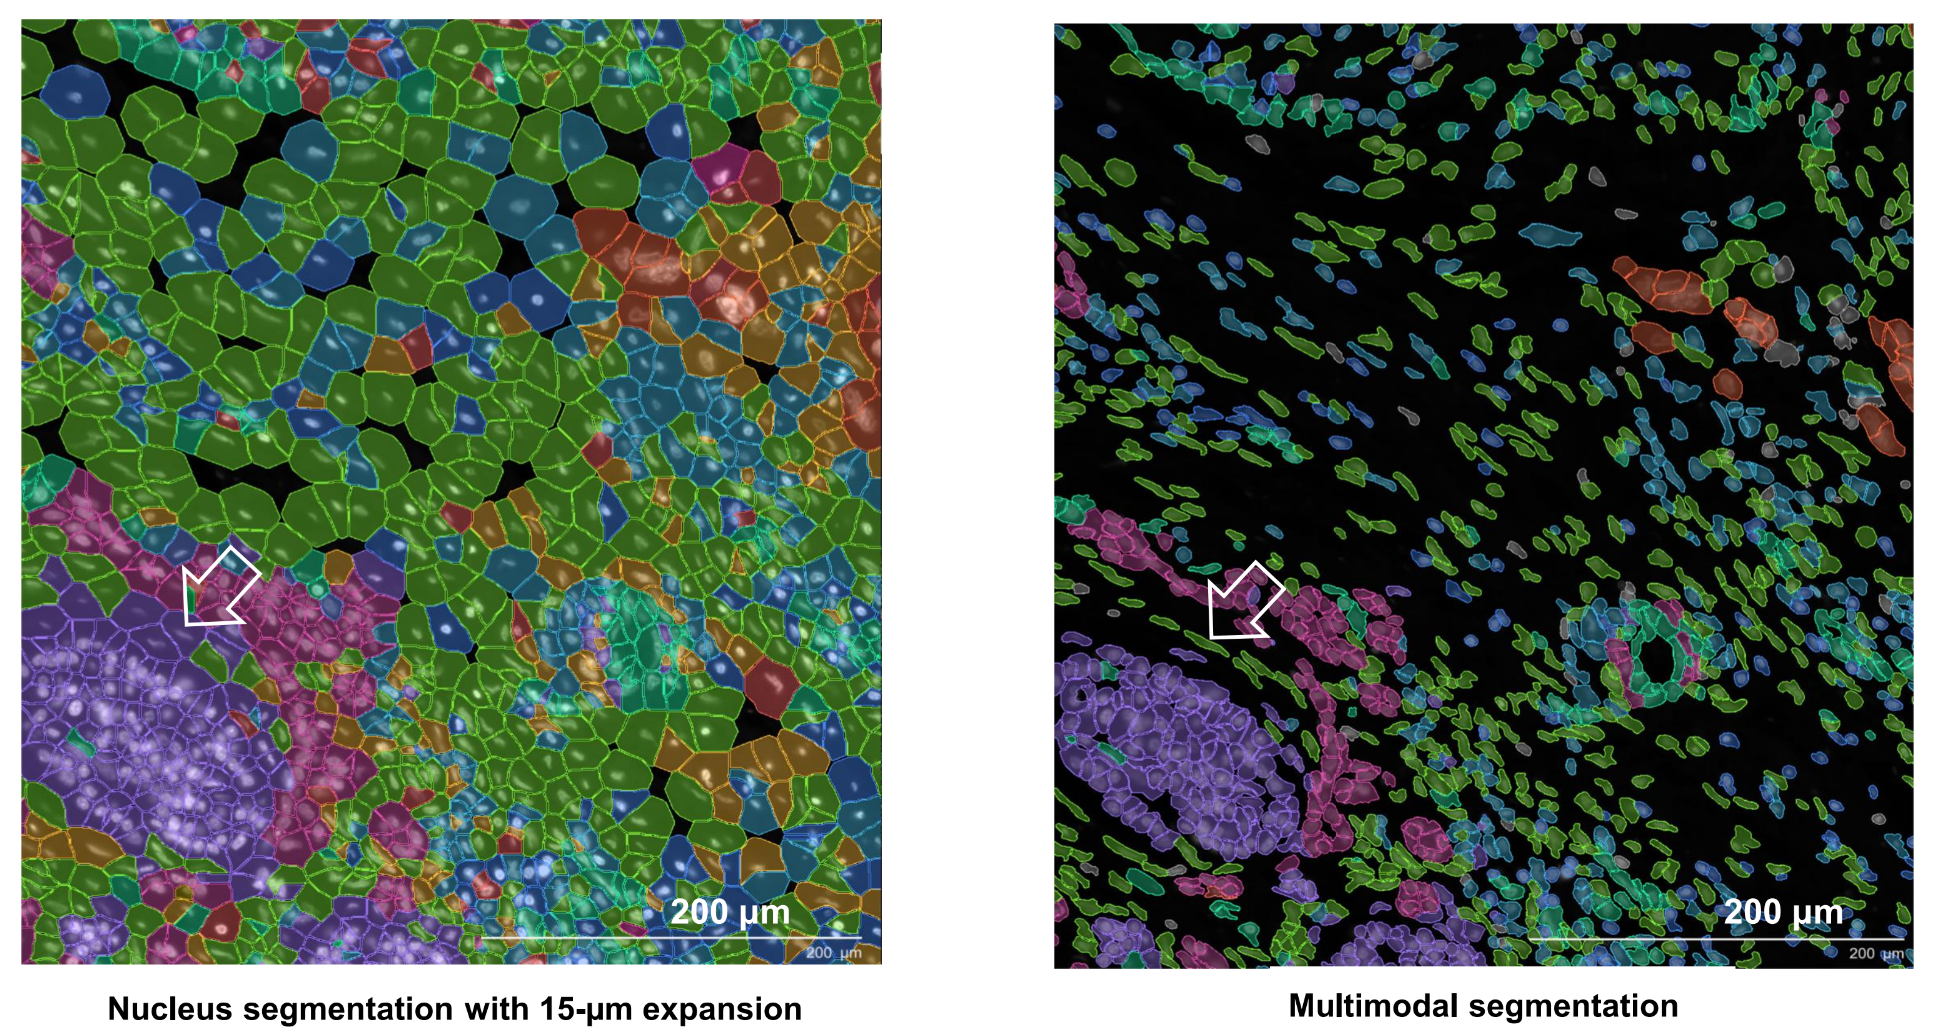 Comparison of segmentation results, with focus on fibroblasts (arrow), based on the nuclear expansion and multimodal approaches.